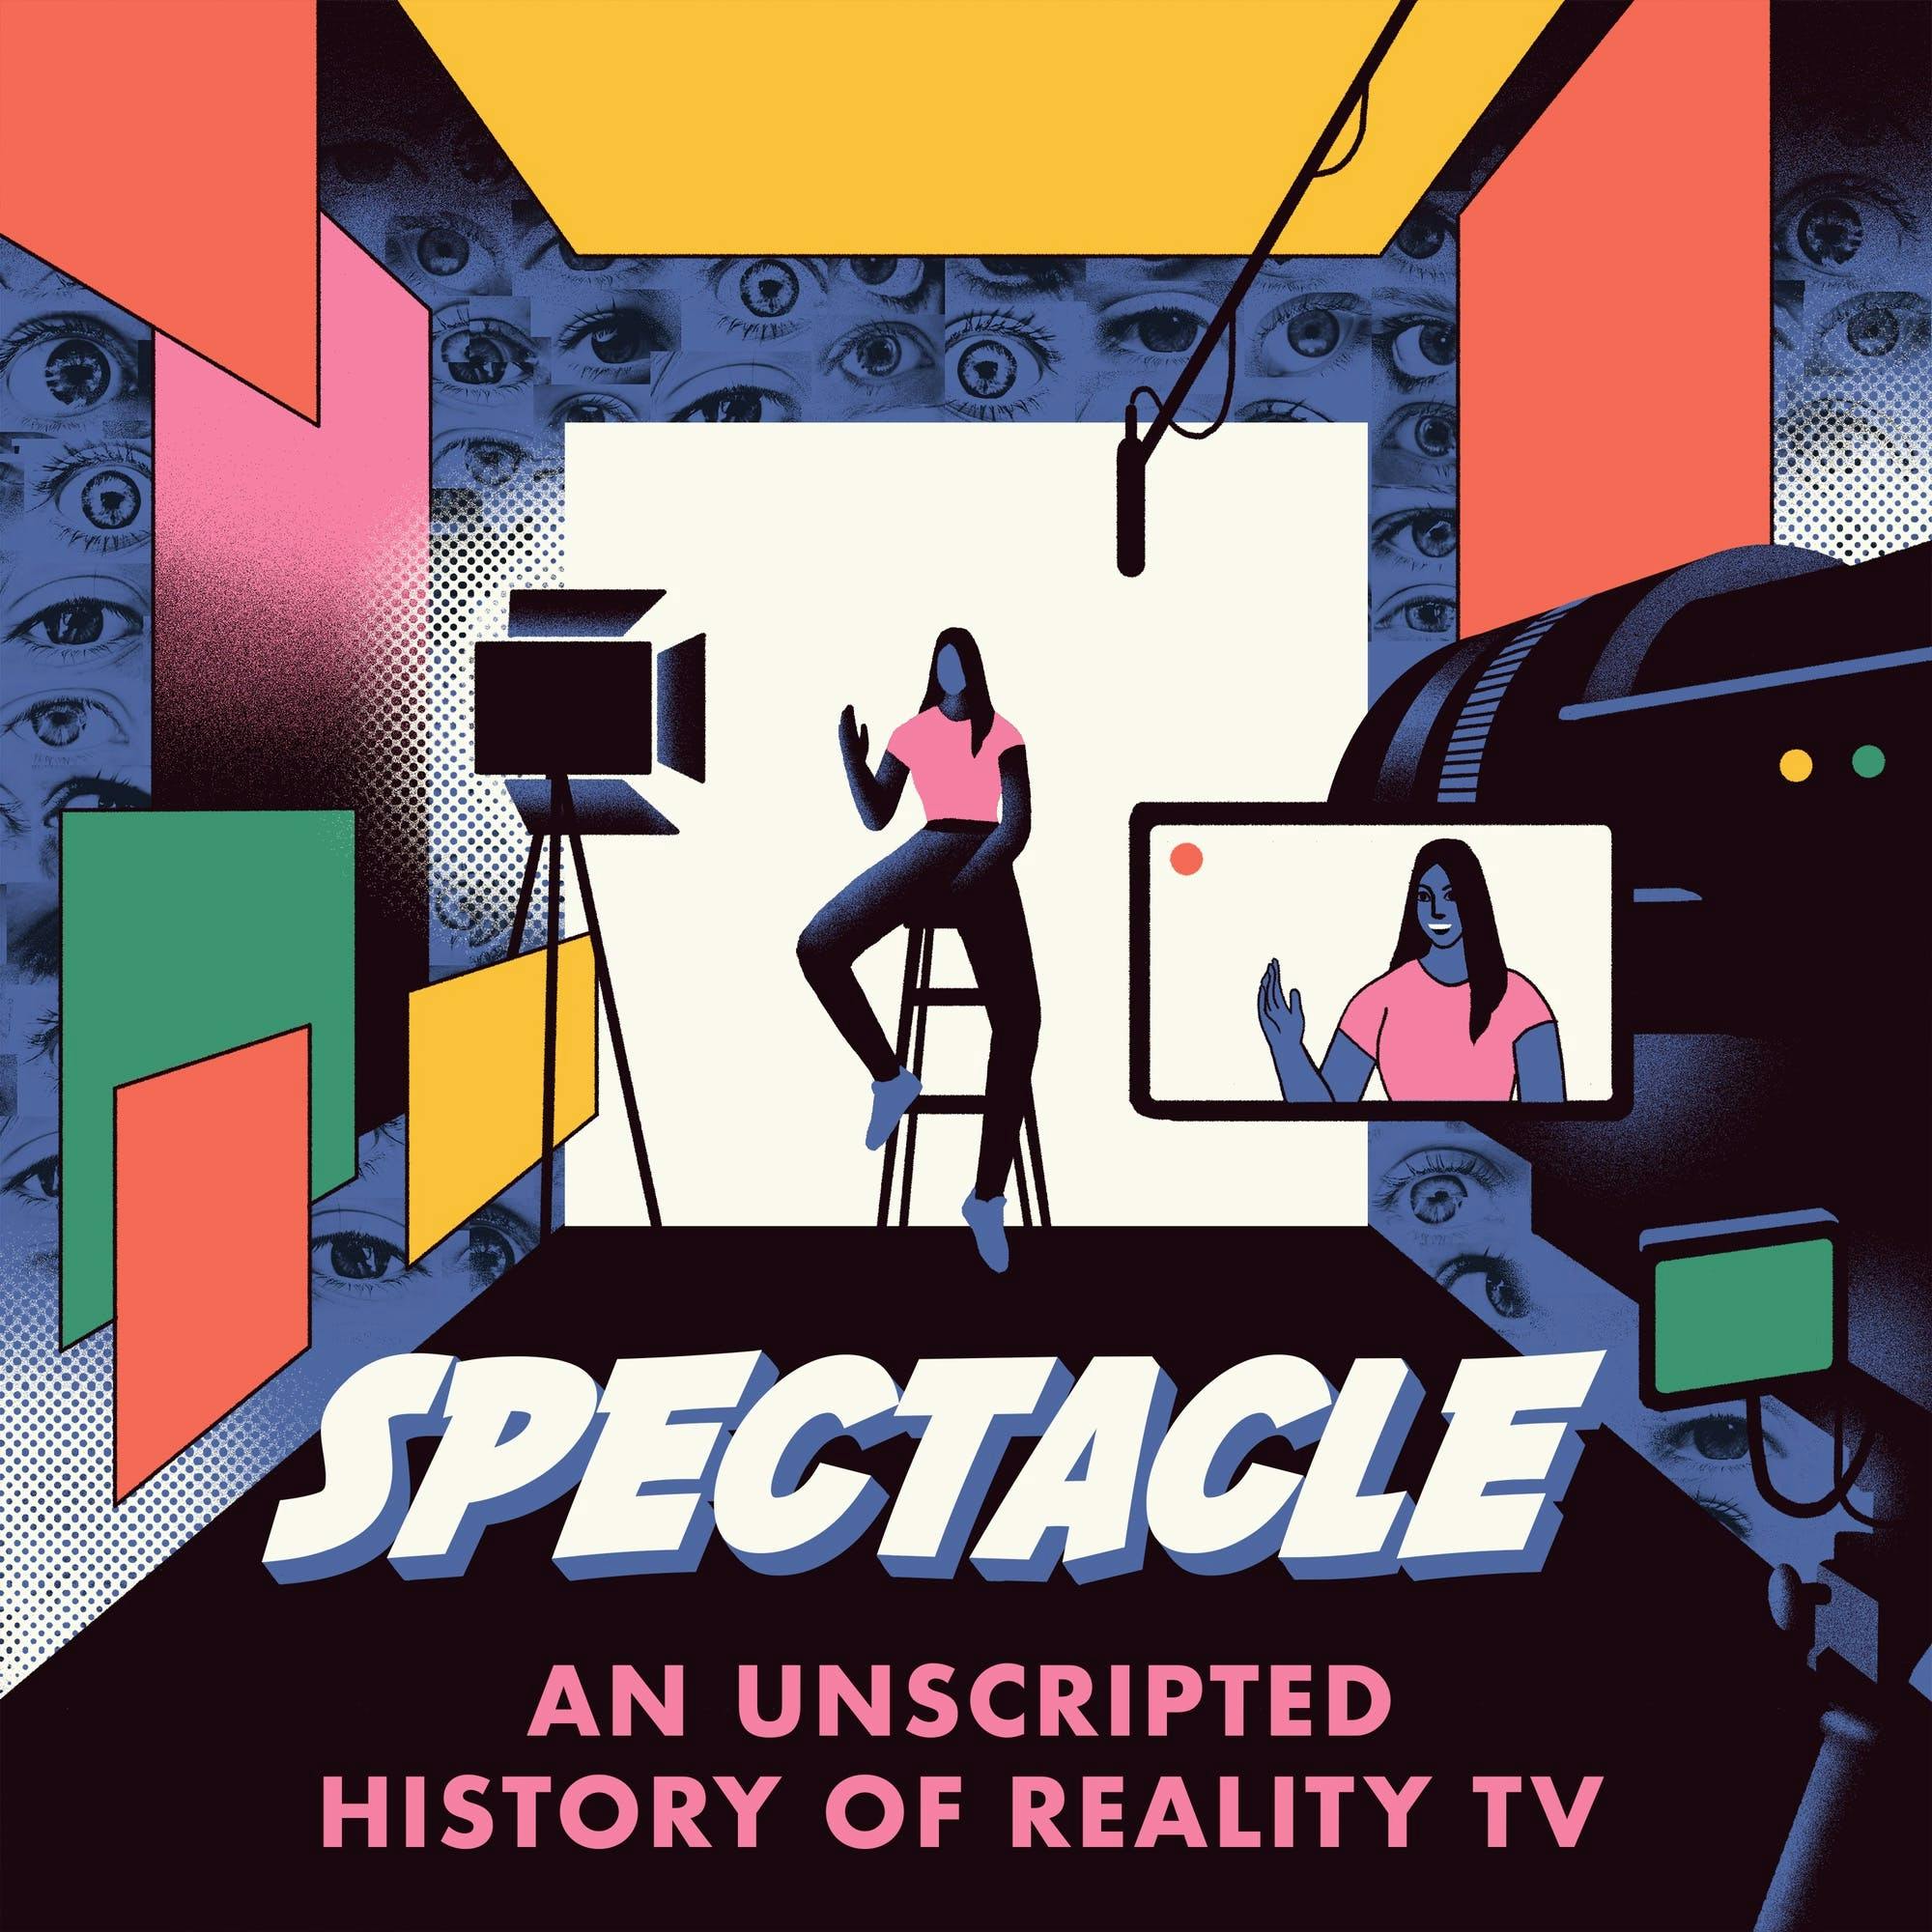 Spectacle: An Unscripted History of Reality TV